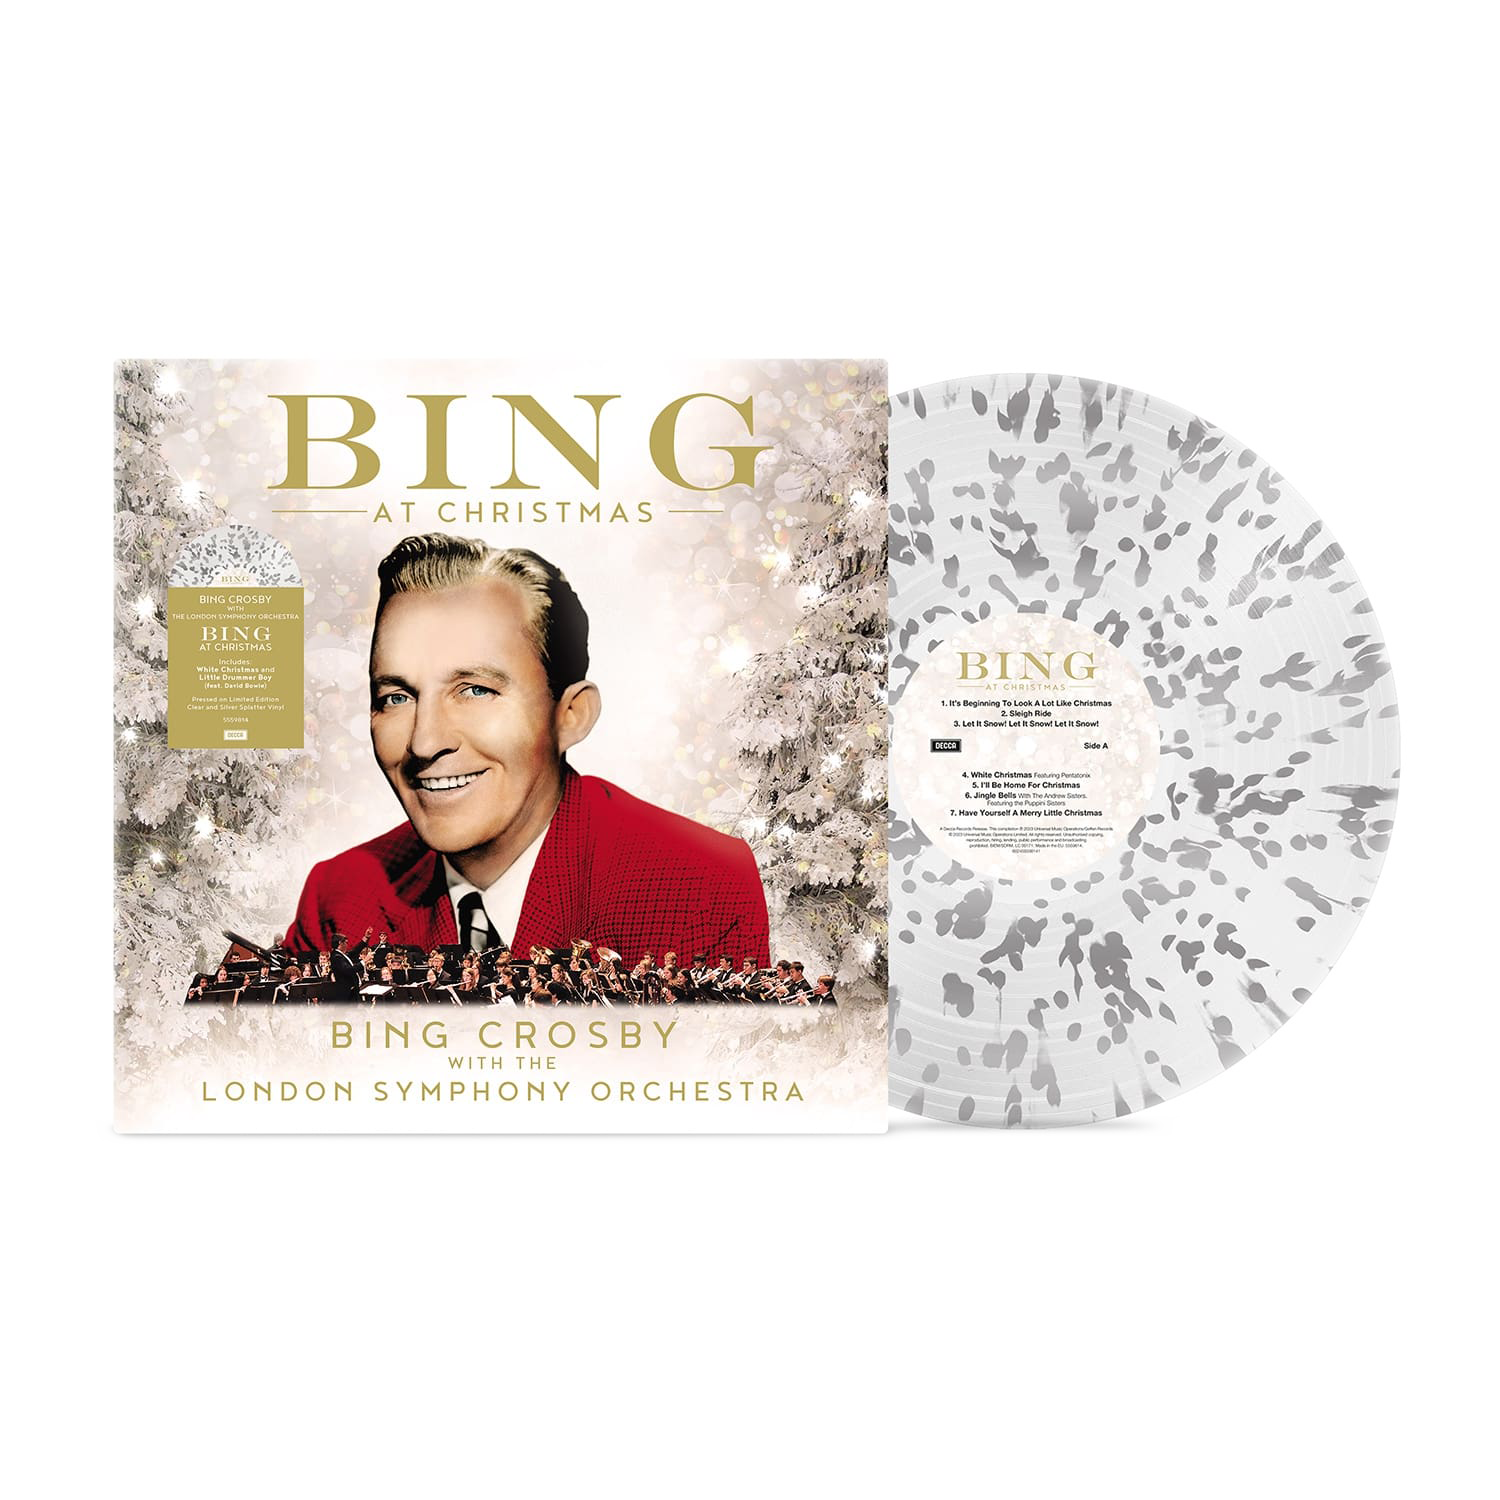 Bing Crosby, London Symphony Orchestra - Bing at Christmas (speckled vinyl)